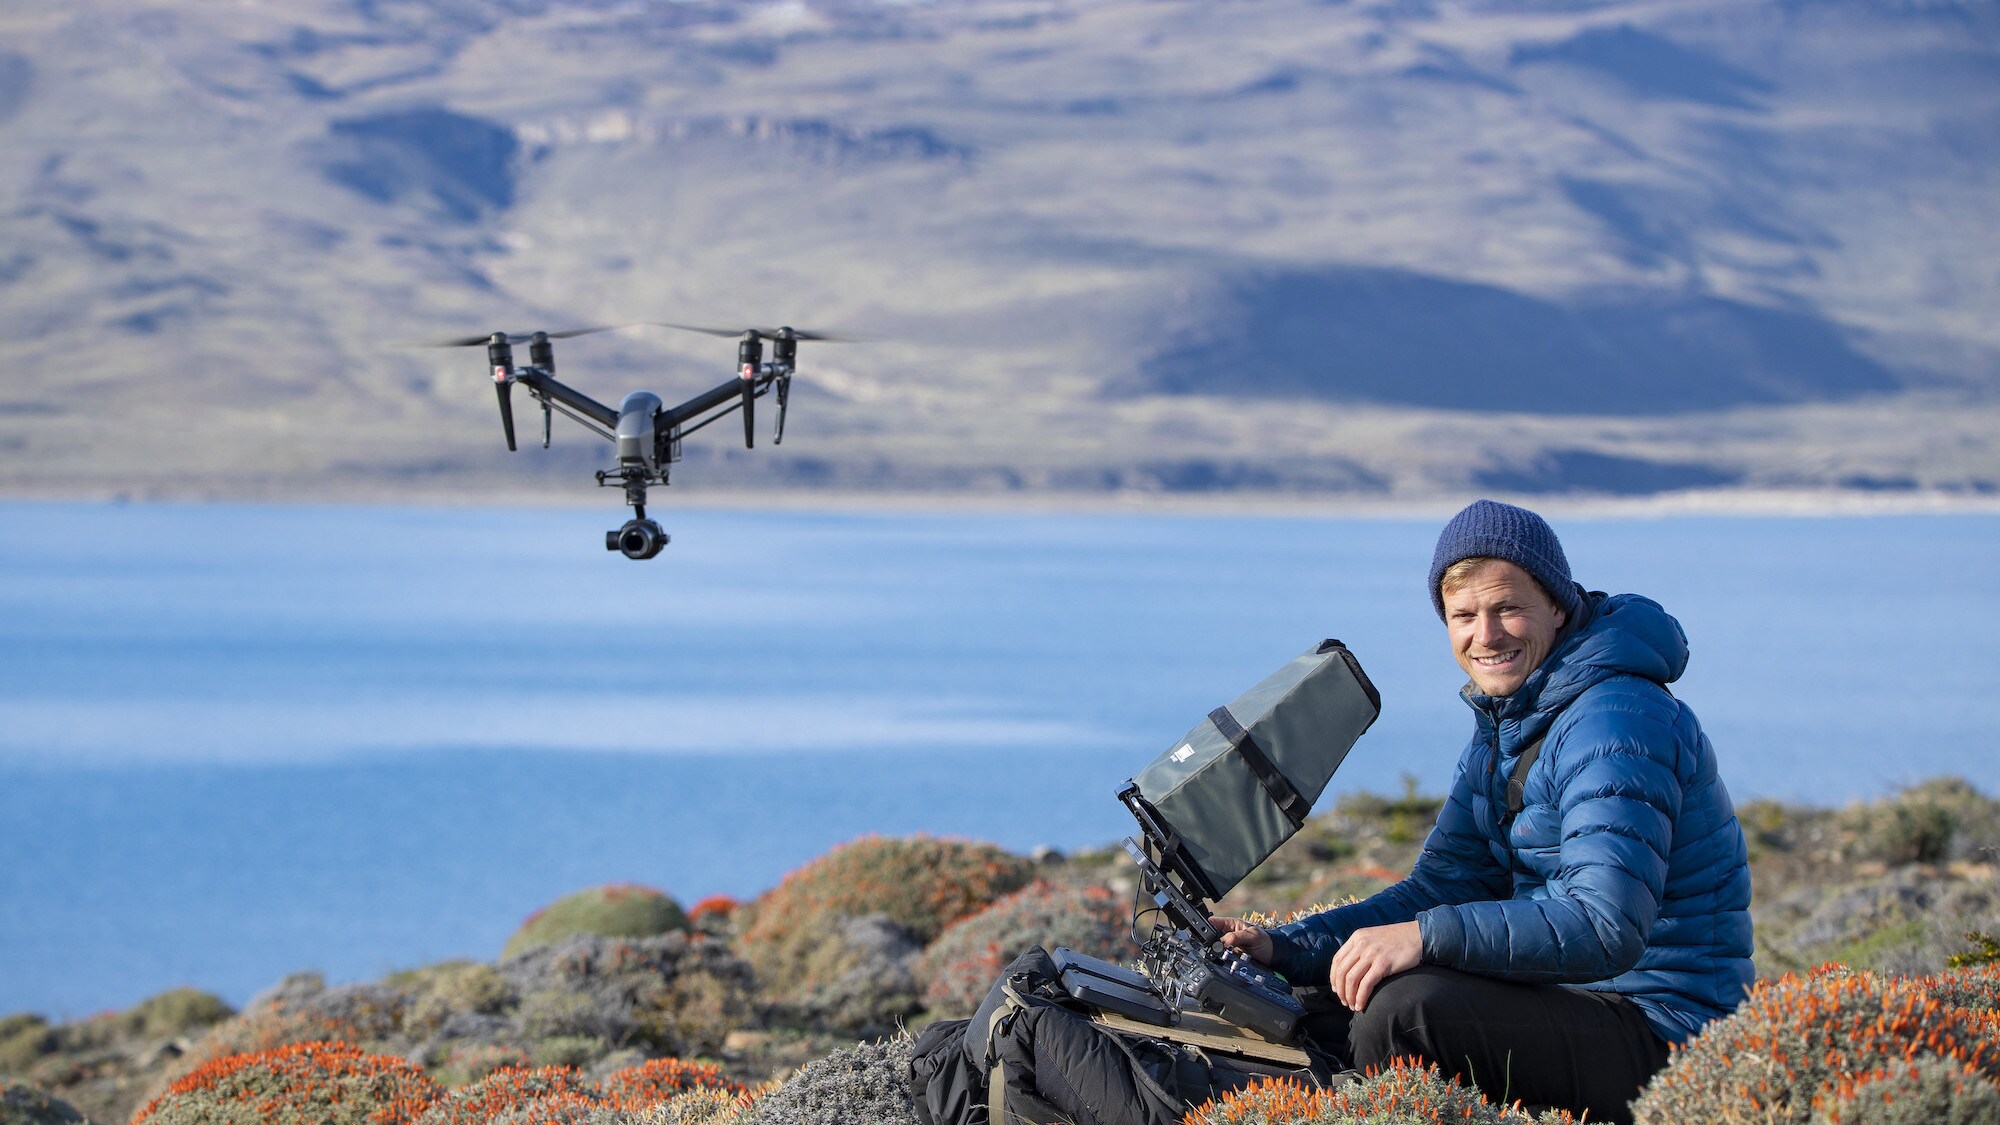 Bertie Gregory smiling at the camera and controlling the drone.  (National Geographic for Disney+/Anna Dimitriadis)